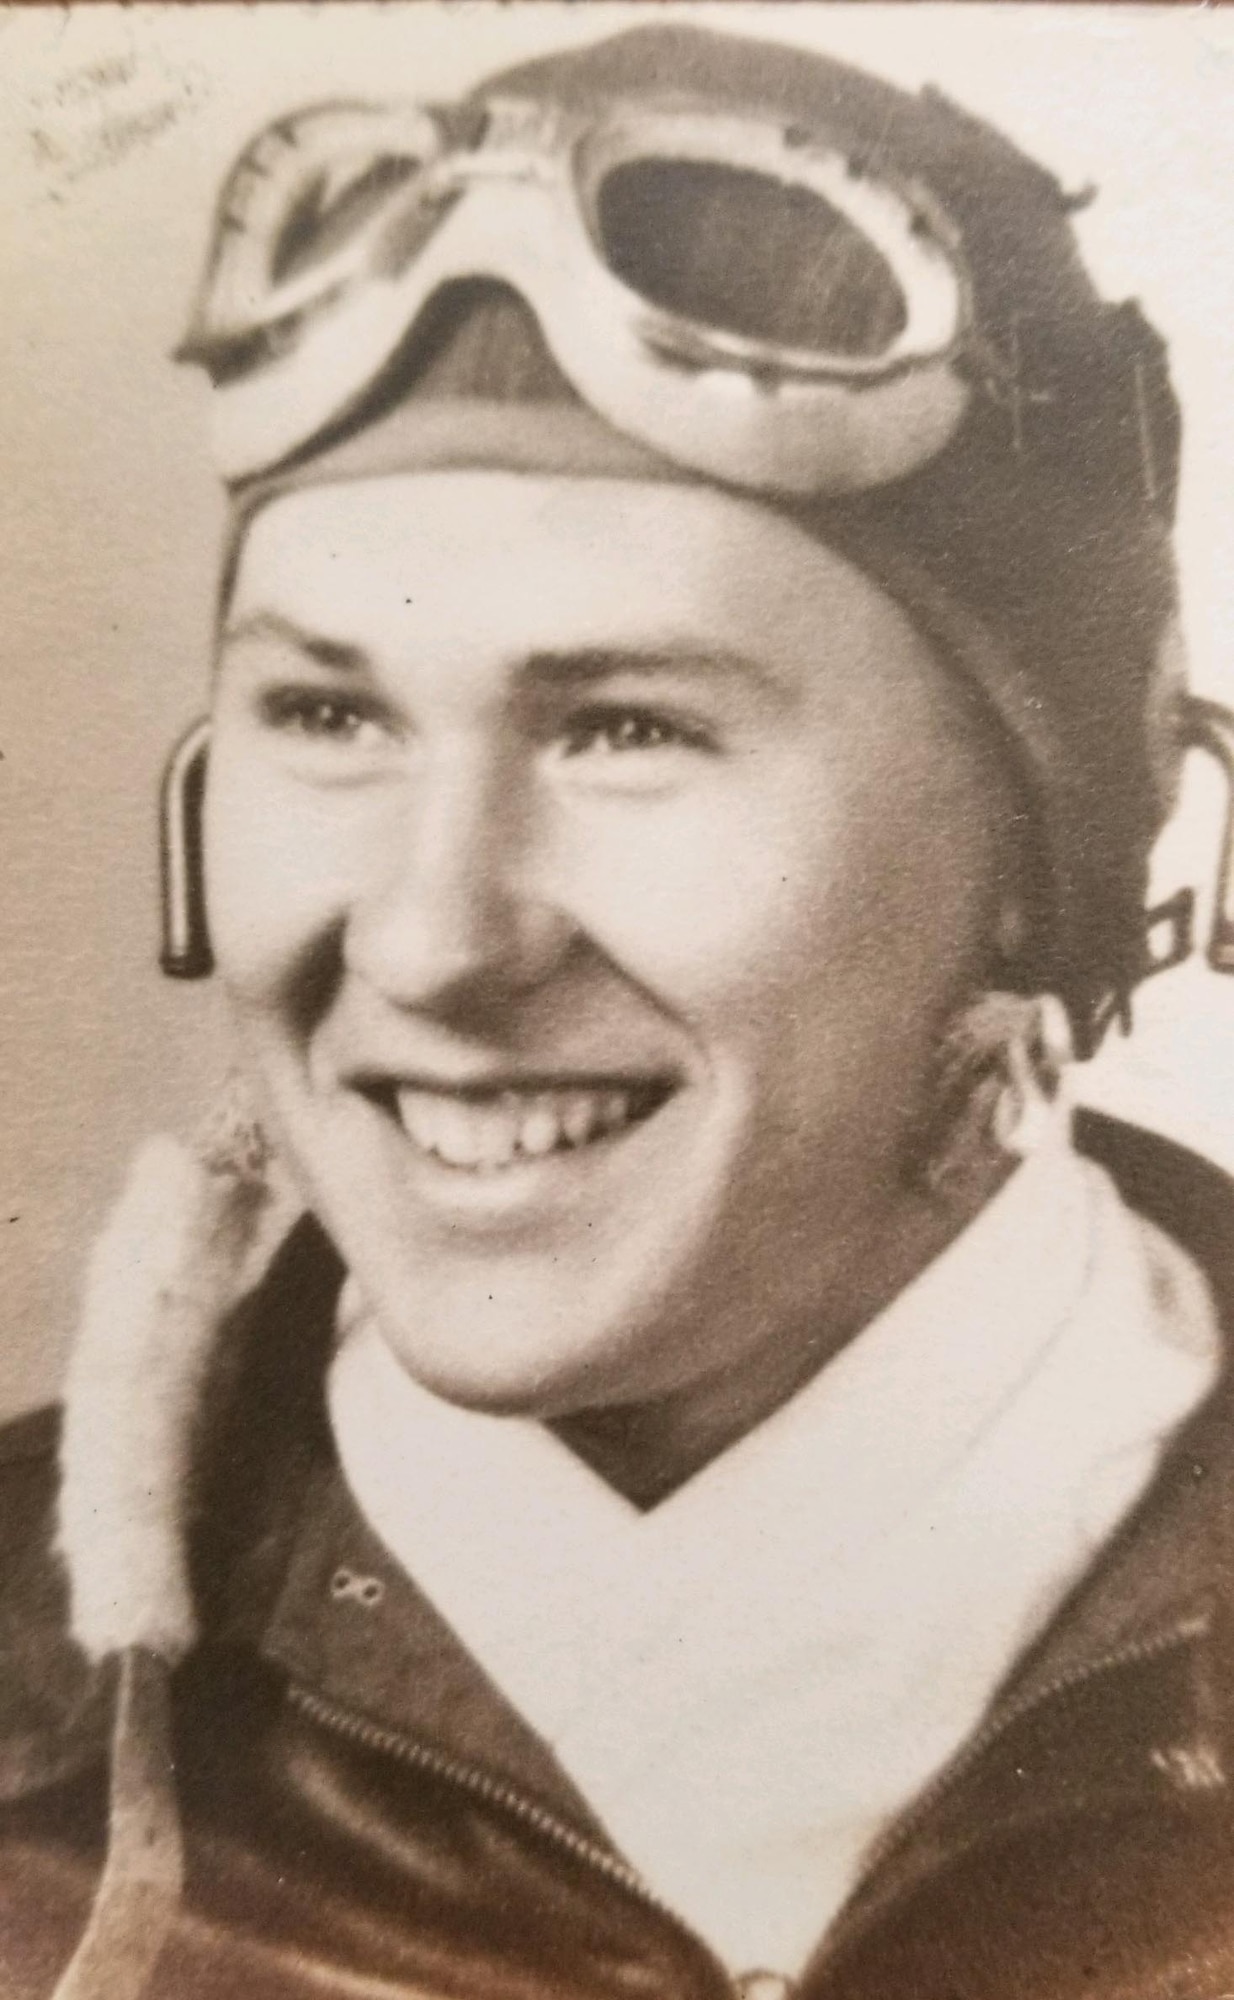 The remains of 2nd Lt. James R. Lord, former P-47 Thunderbolt pilot have been found and identified.